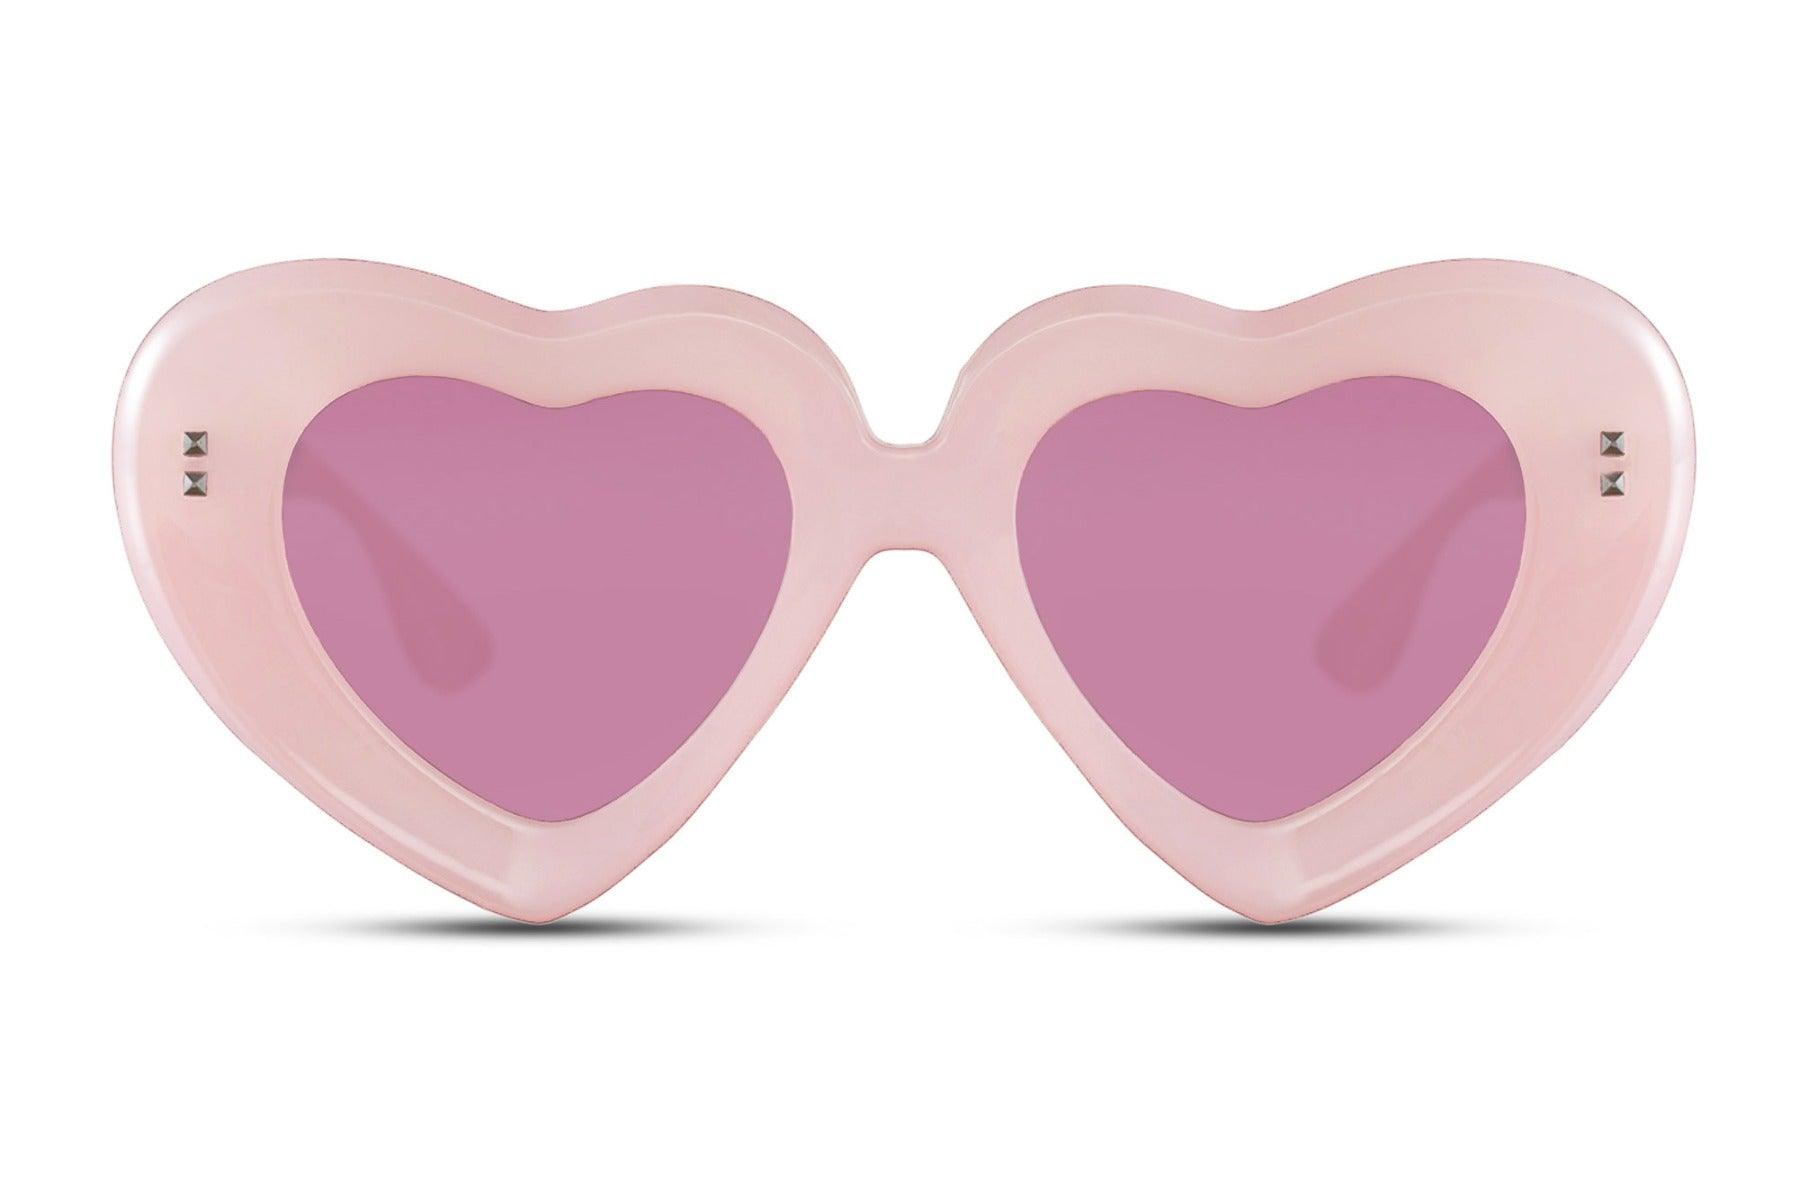 Ardor Heart Shaped Pink Sunglasses - Blissfully Brand - Love Thick Retro Funky Mod Translucent